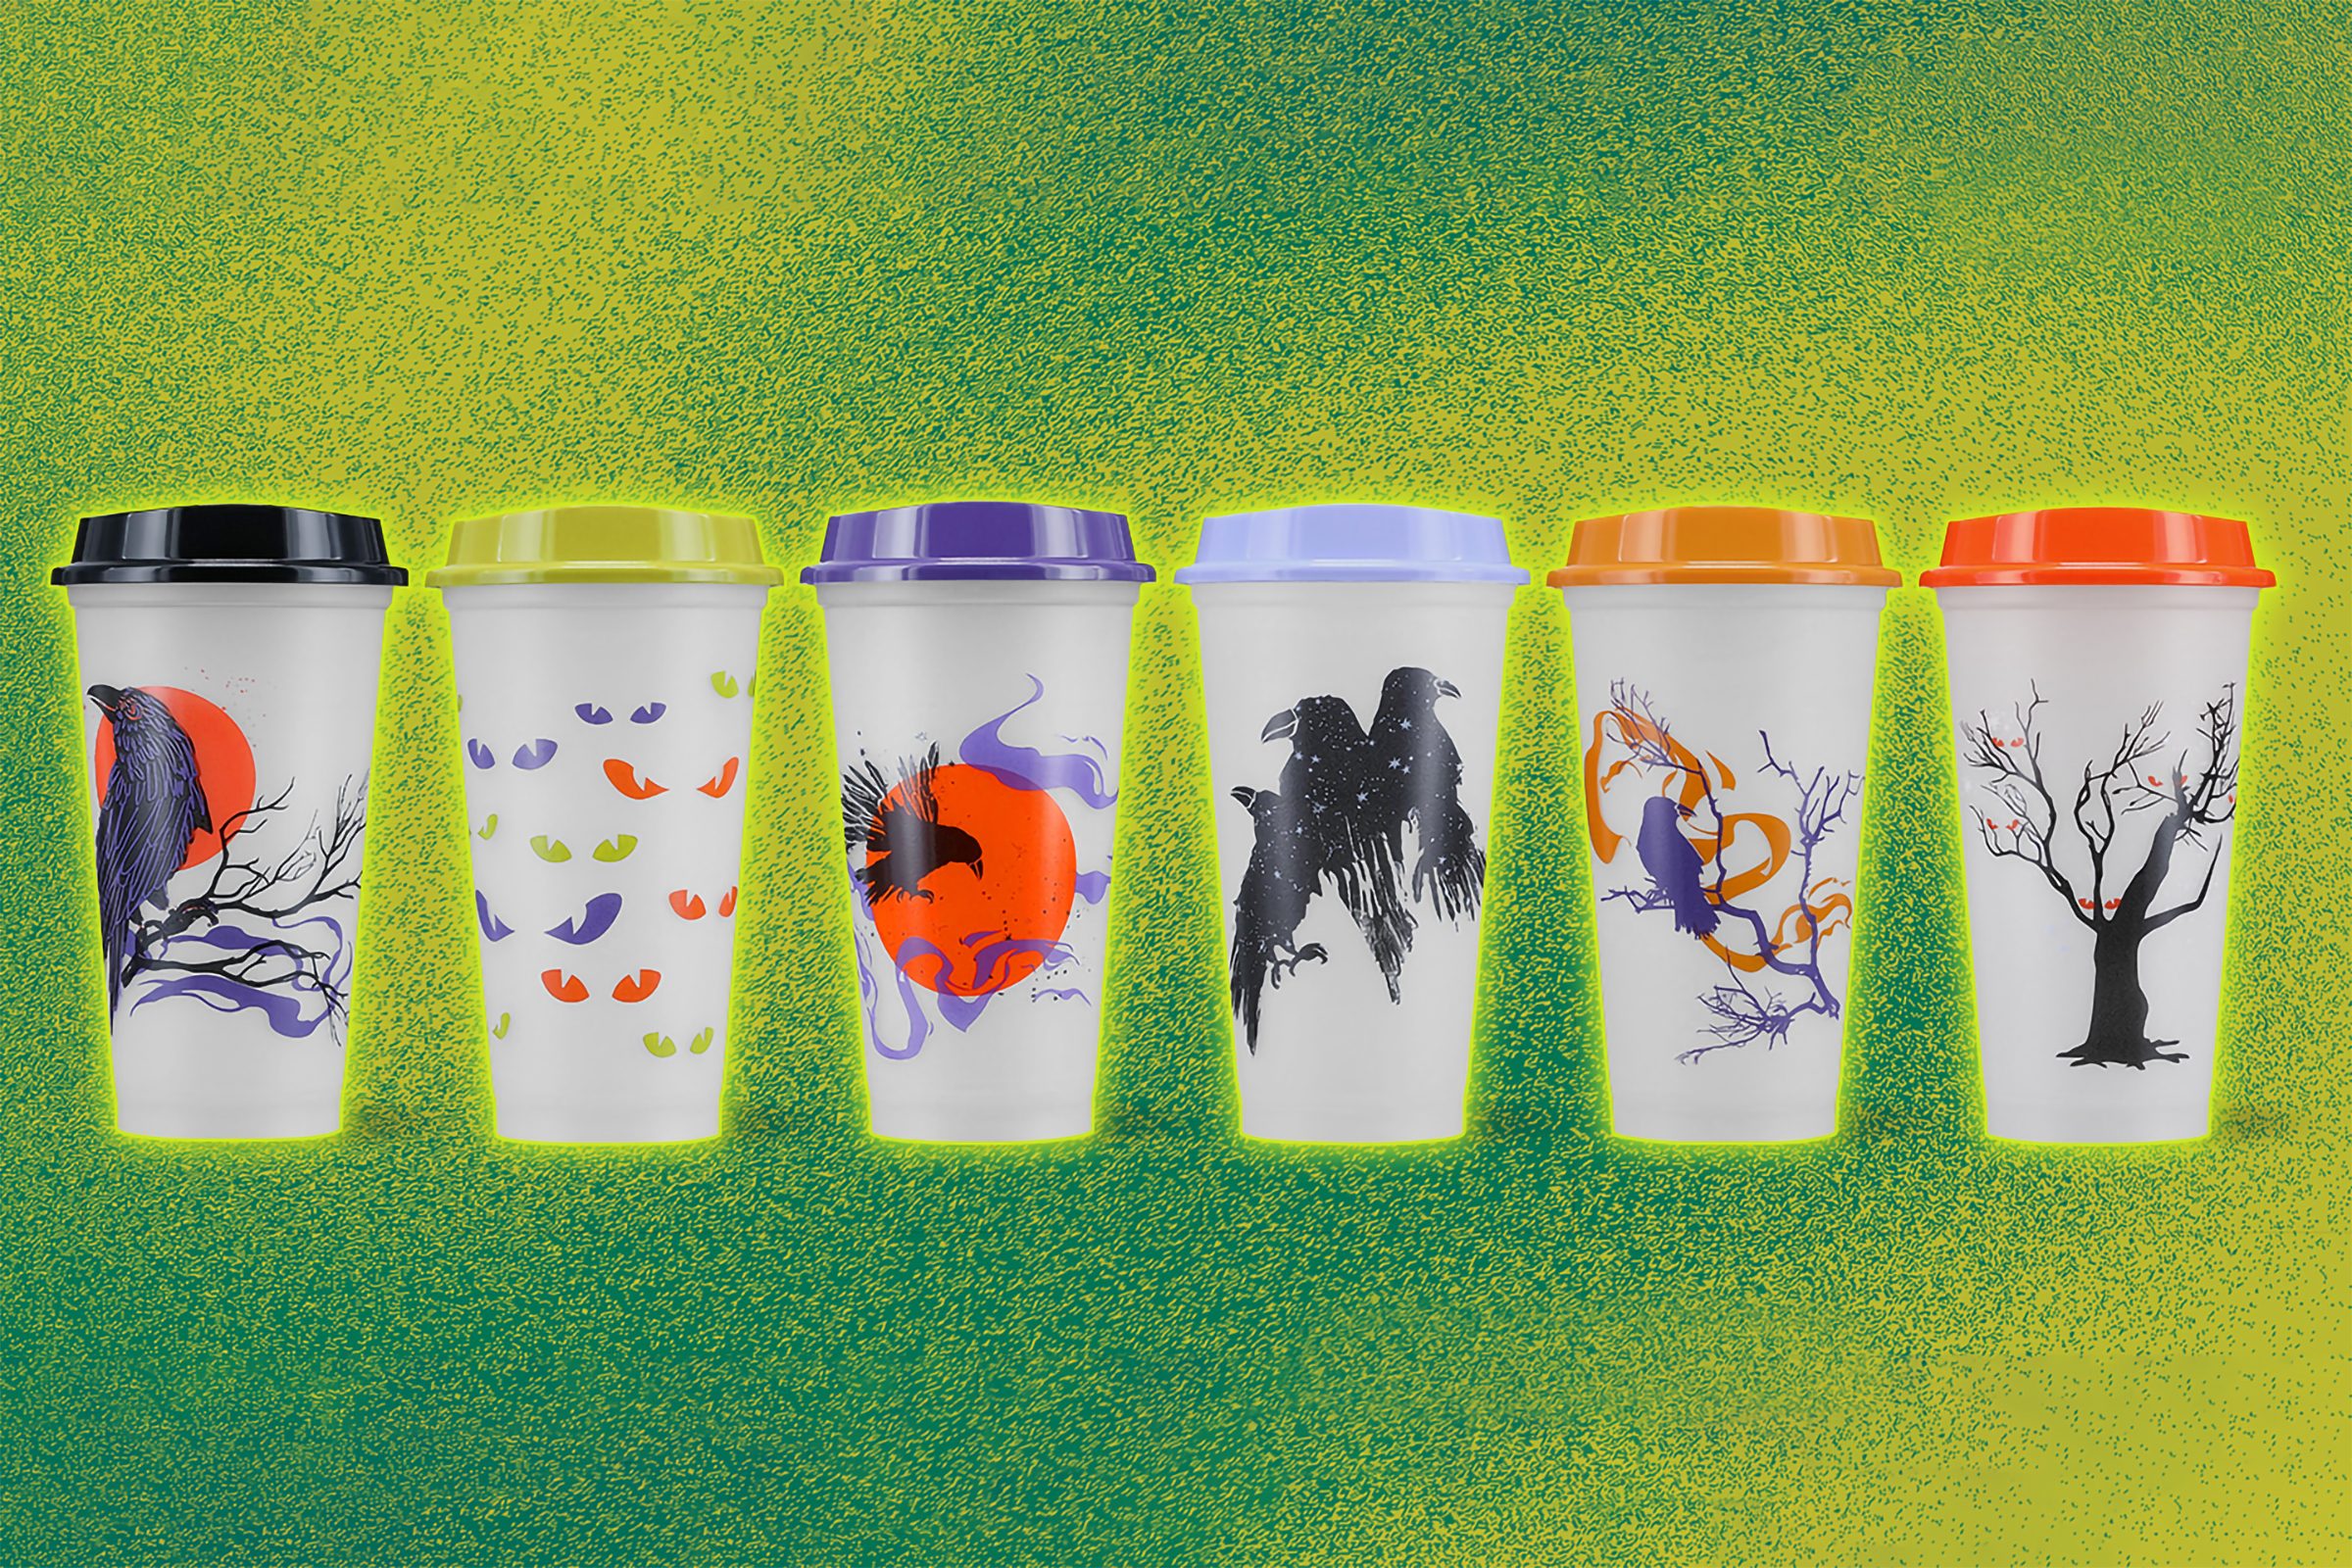 Starbucks Halloween Cups Are Here for 2022—This Is Where to Buy Them